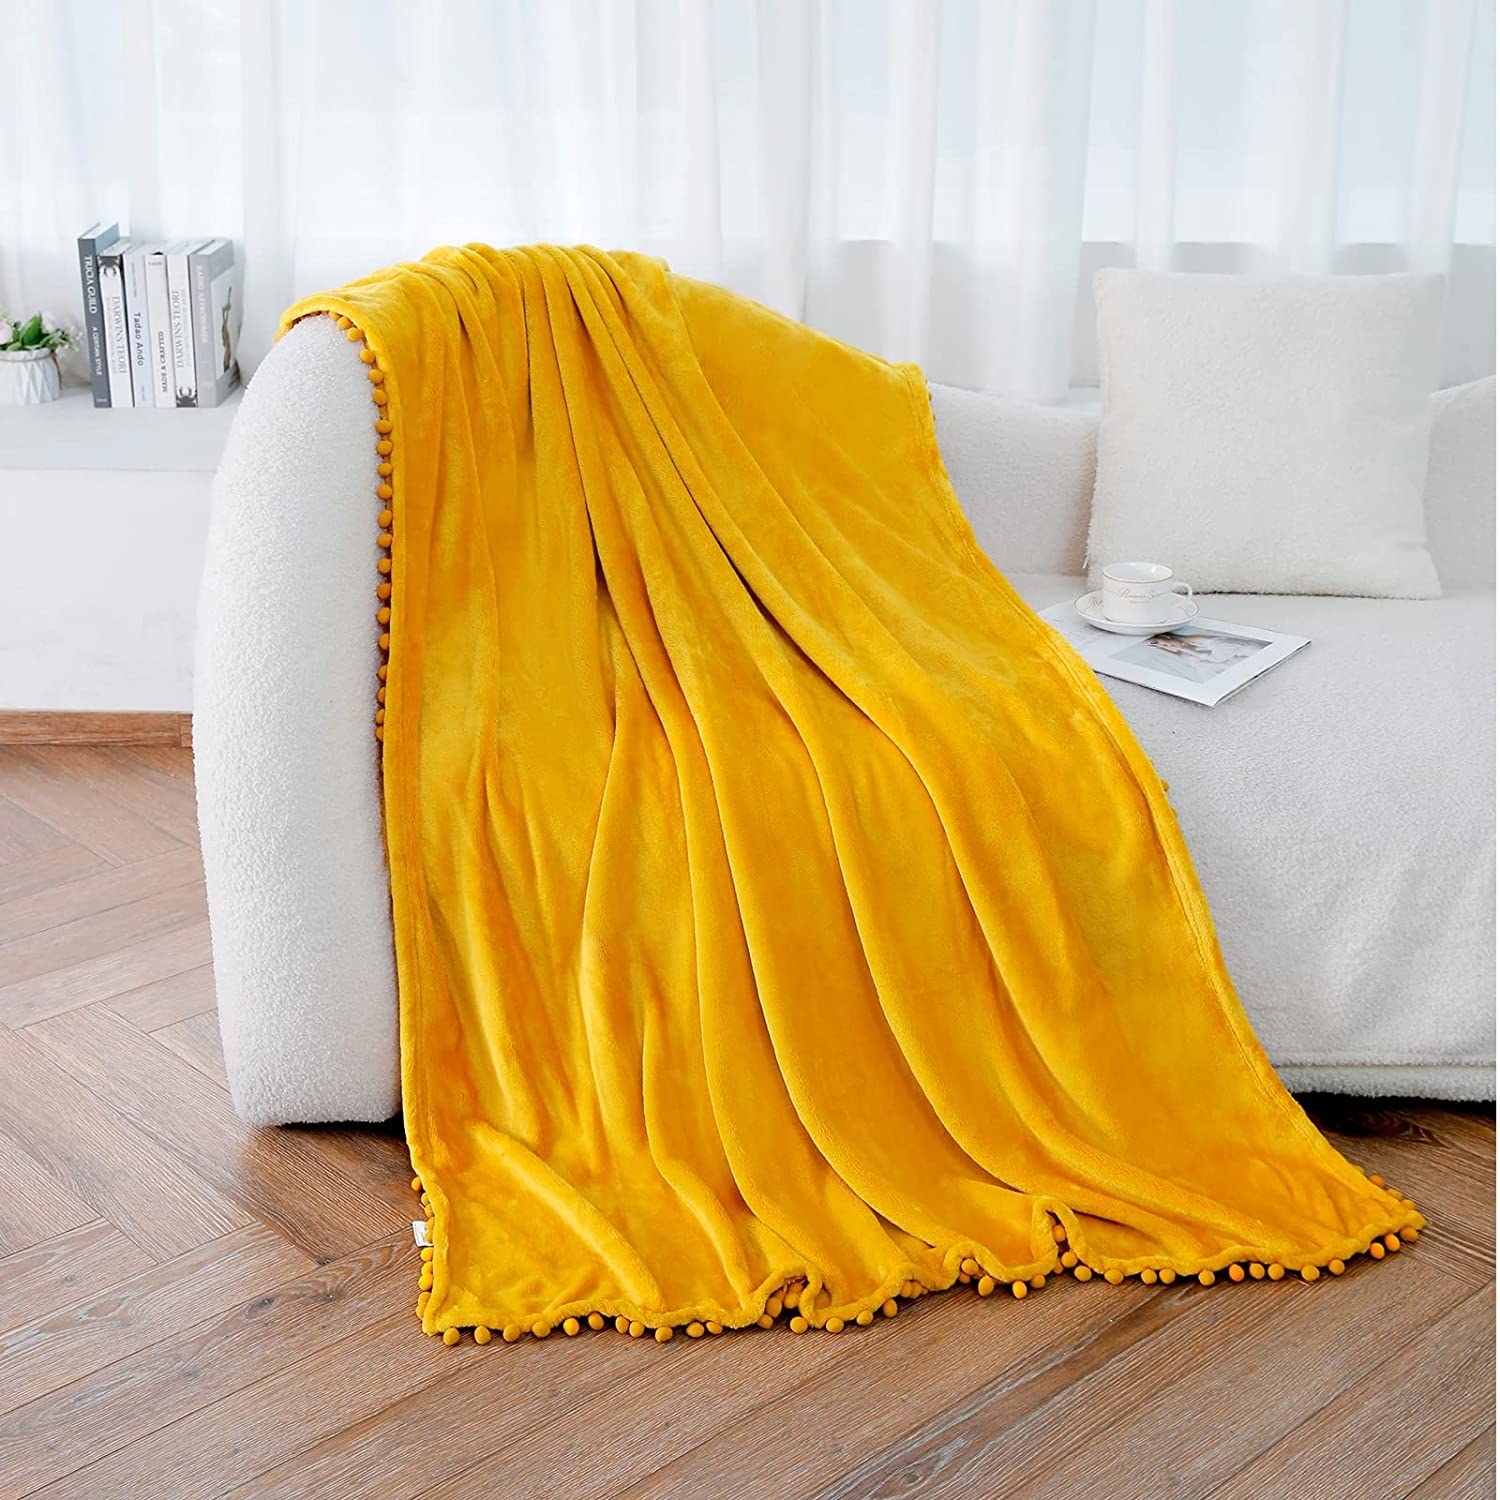 The throw blanket hanging over the side of a couch in a trendy living room